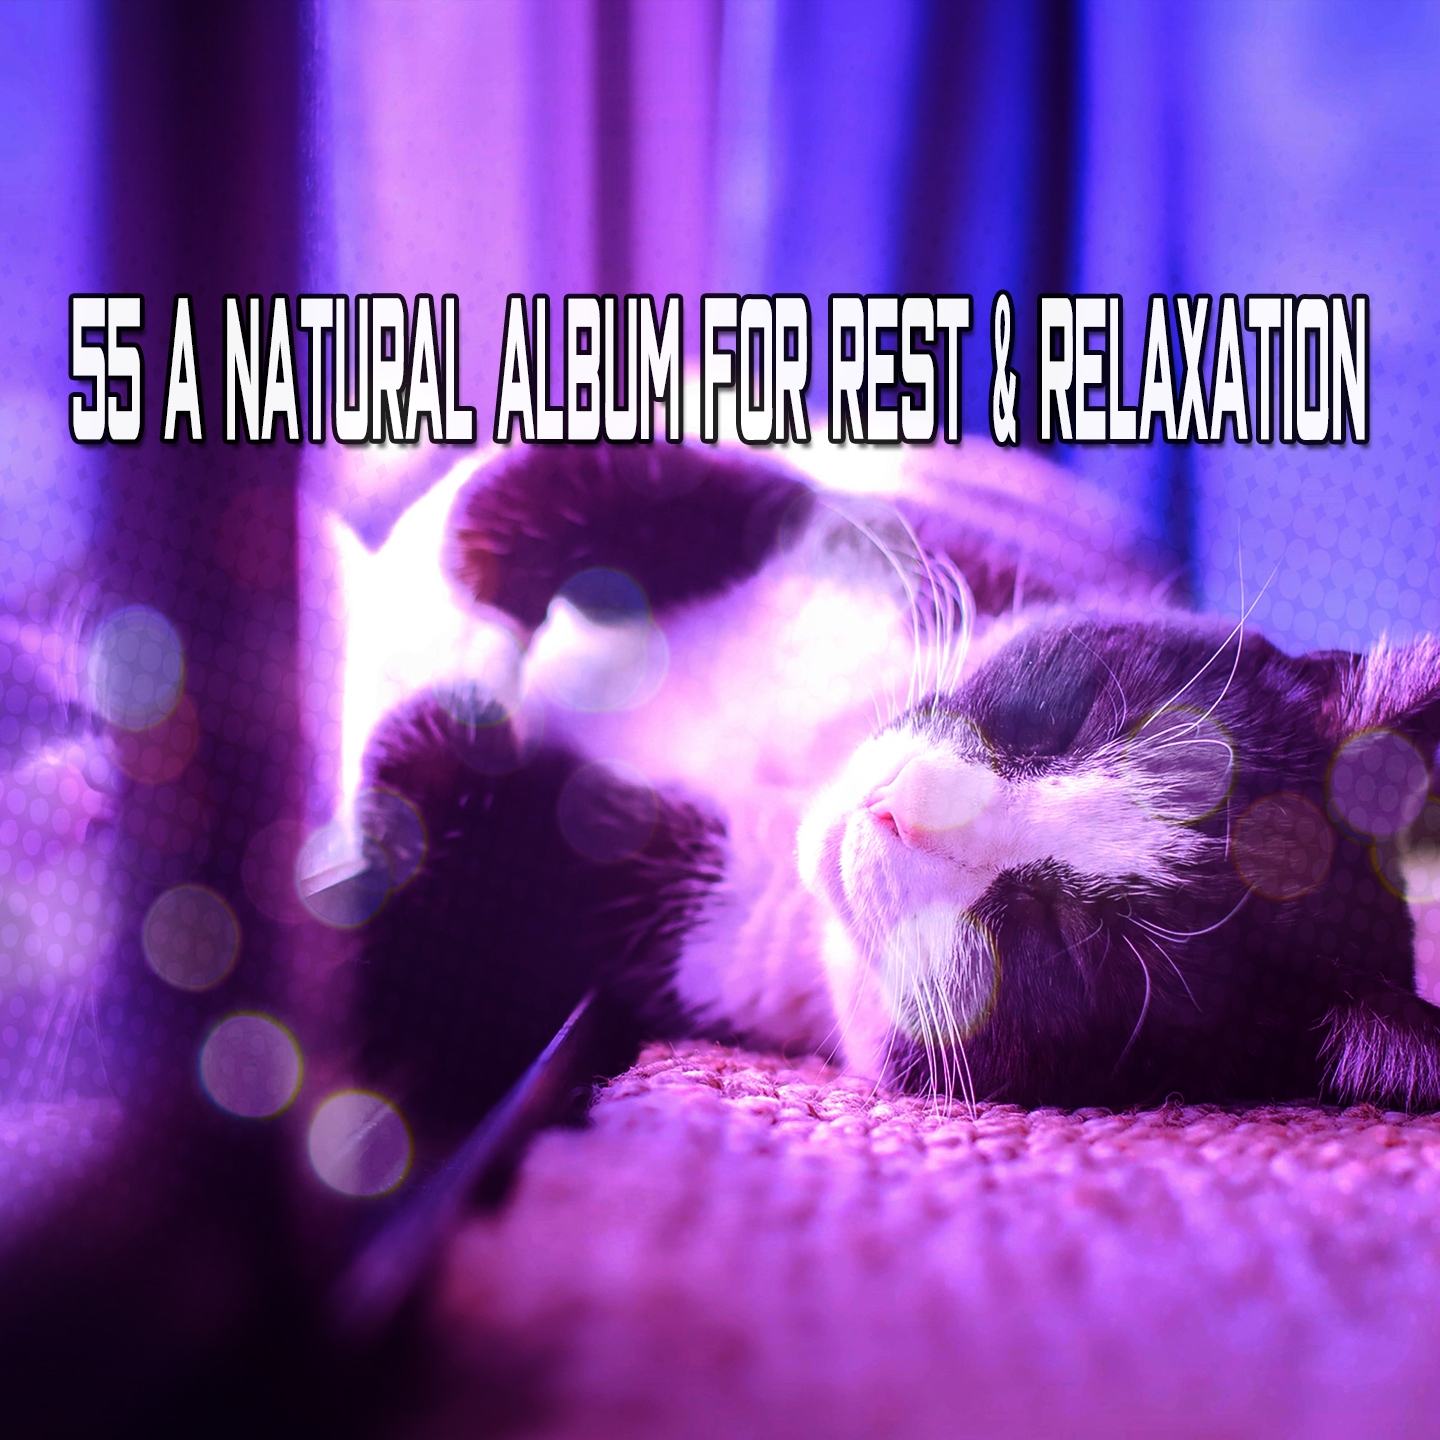 55 A Natural Album For Rest & Relaxation